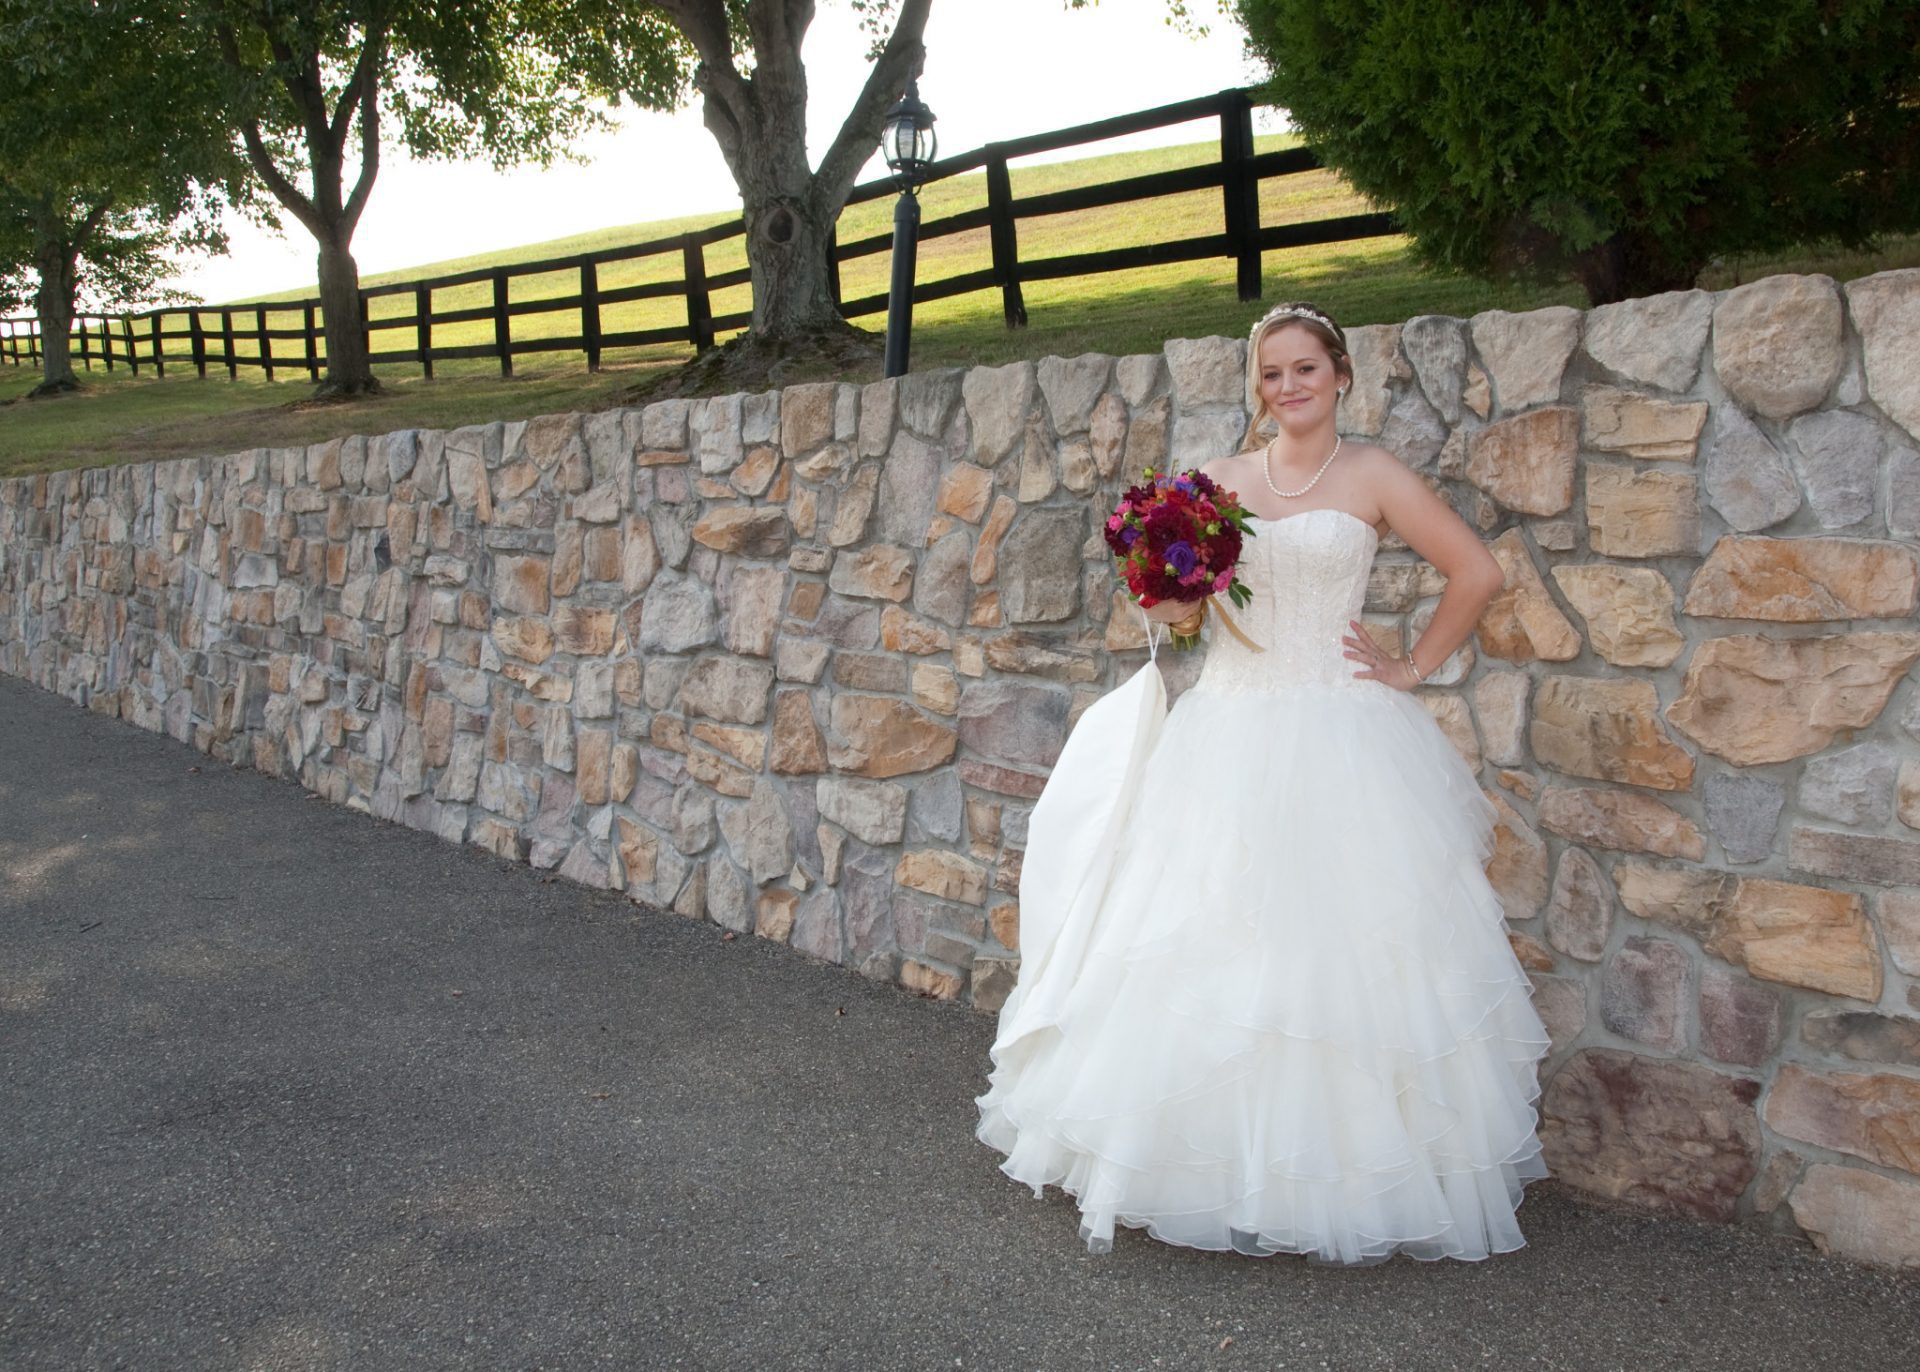 Bride poses by old stone wall at Morningside Inn wedding venue